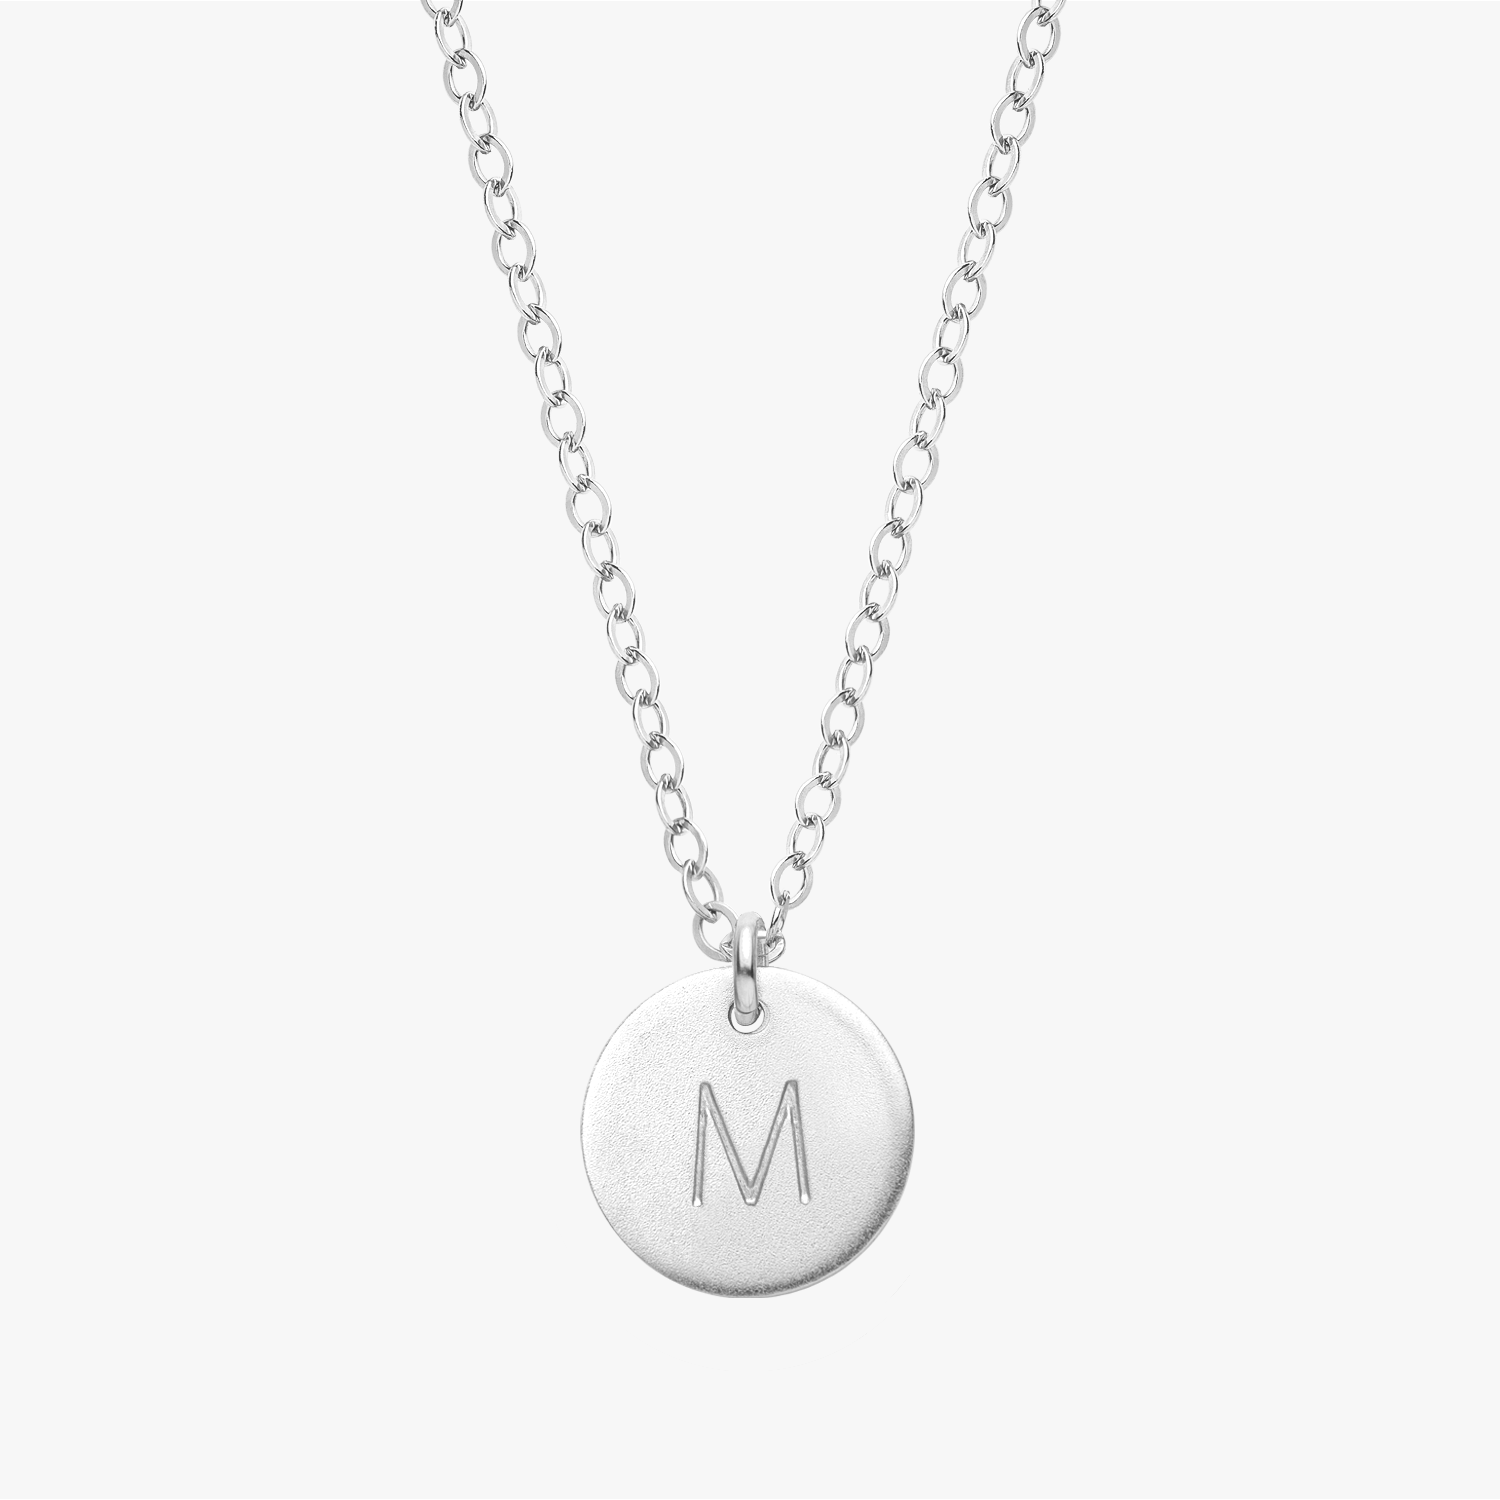 Personalized Disc Necklace Silver